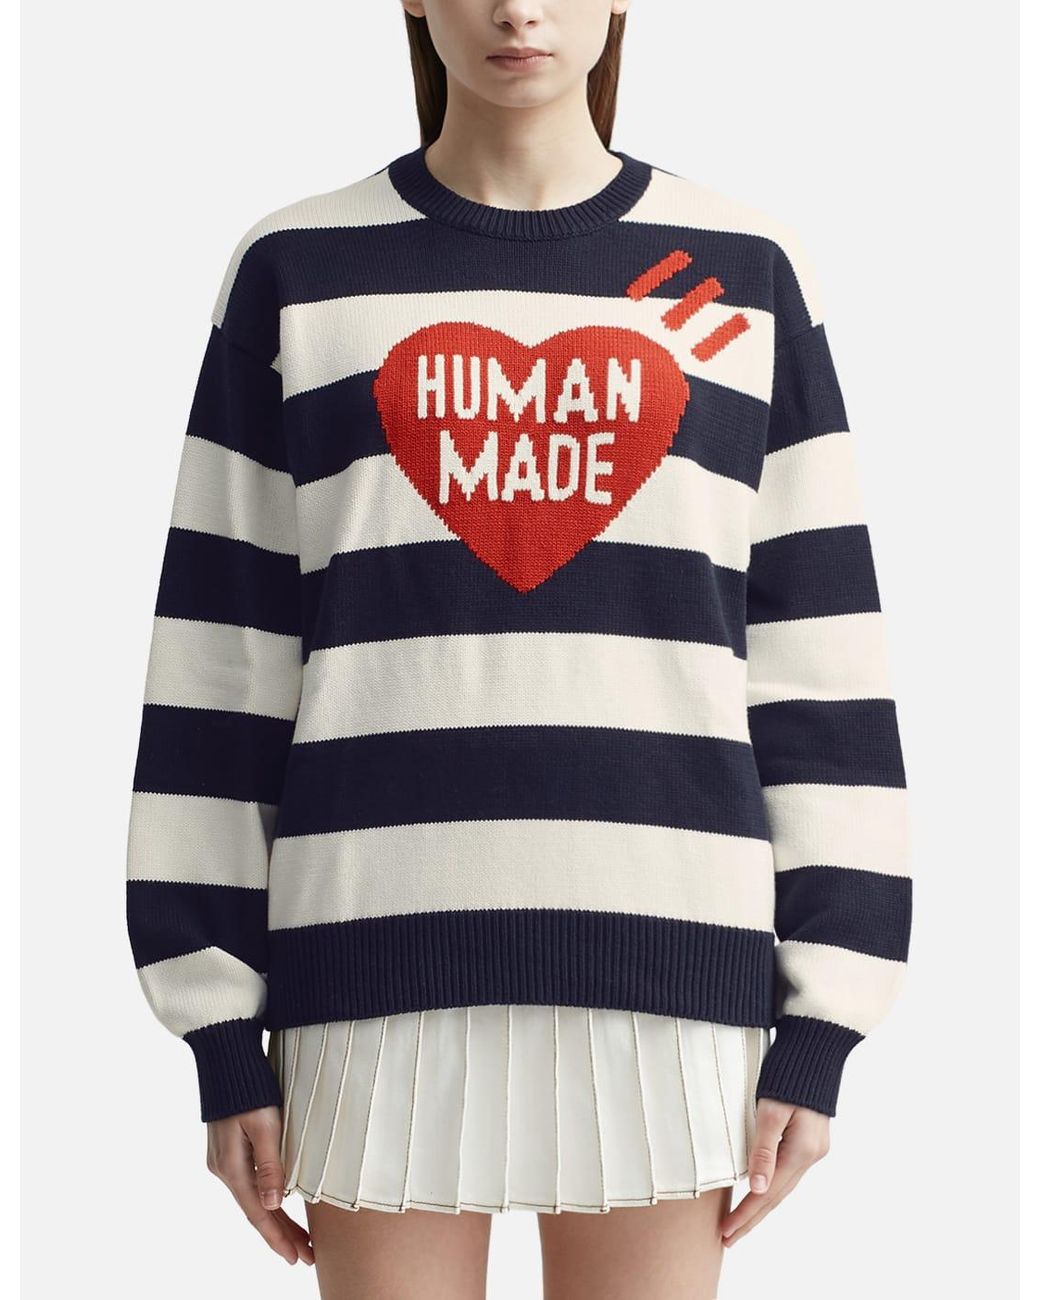 Human Made Striped Heart Knit Sweater in Blue | Lyst Canada